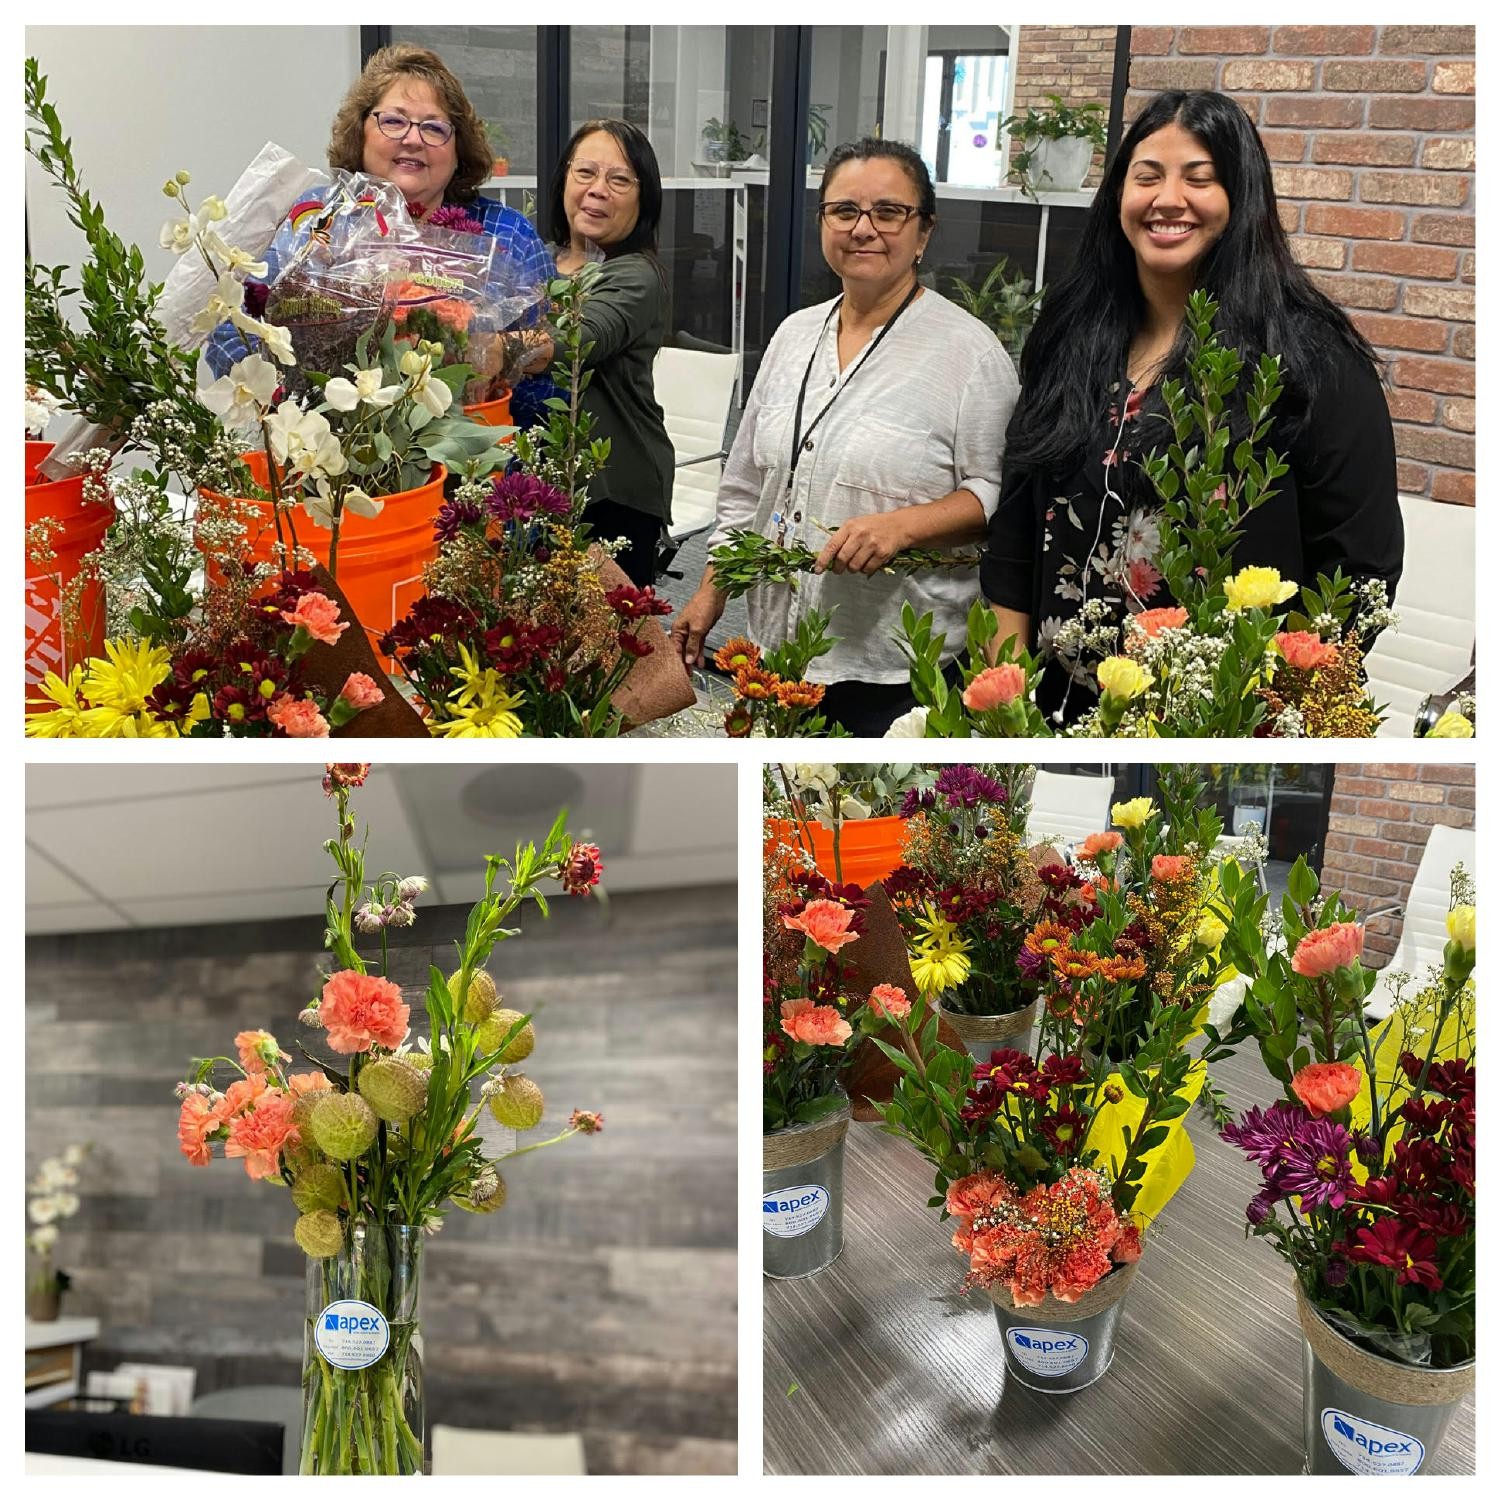 Volunteers create hand made bouquets for our hospice patients and are hand delivered to their Homes. We love seeing the smiles on our seniors faces when they see the flowers!